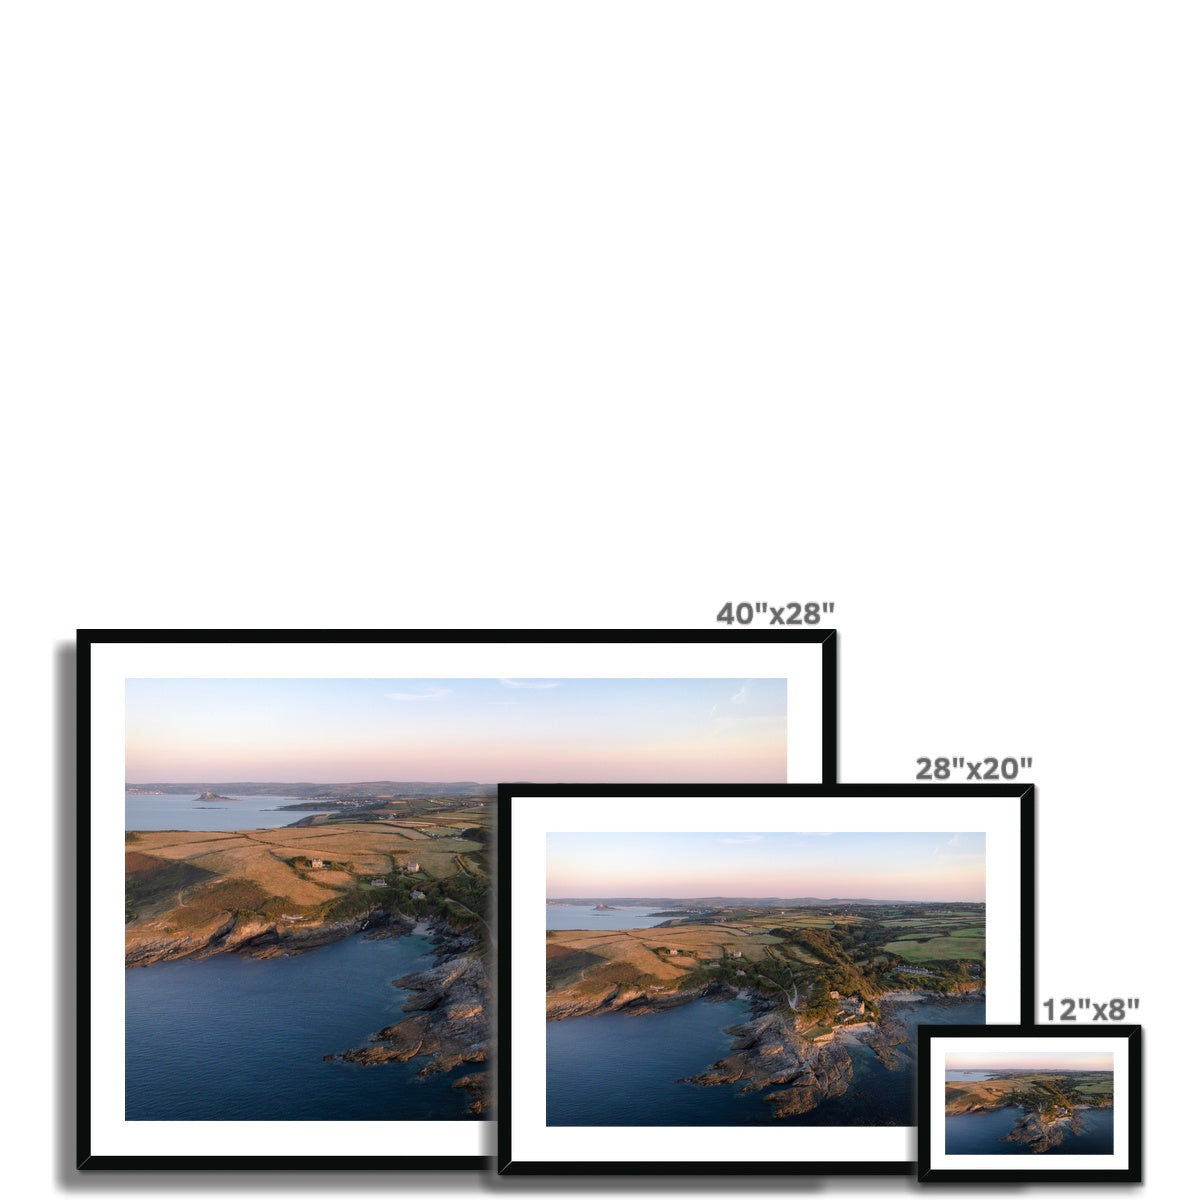 bessys prussia cove frame sizes